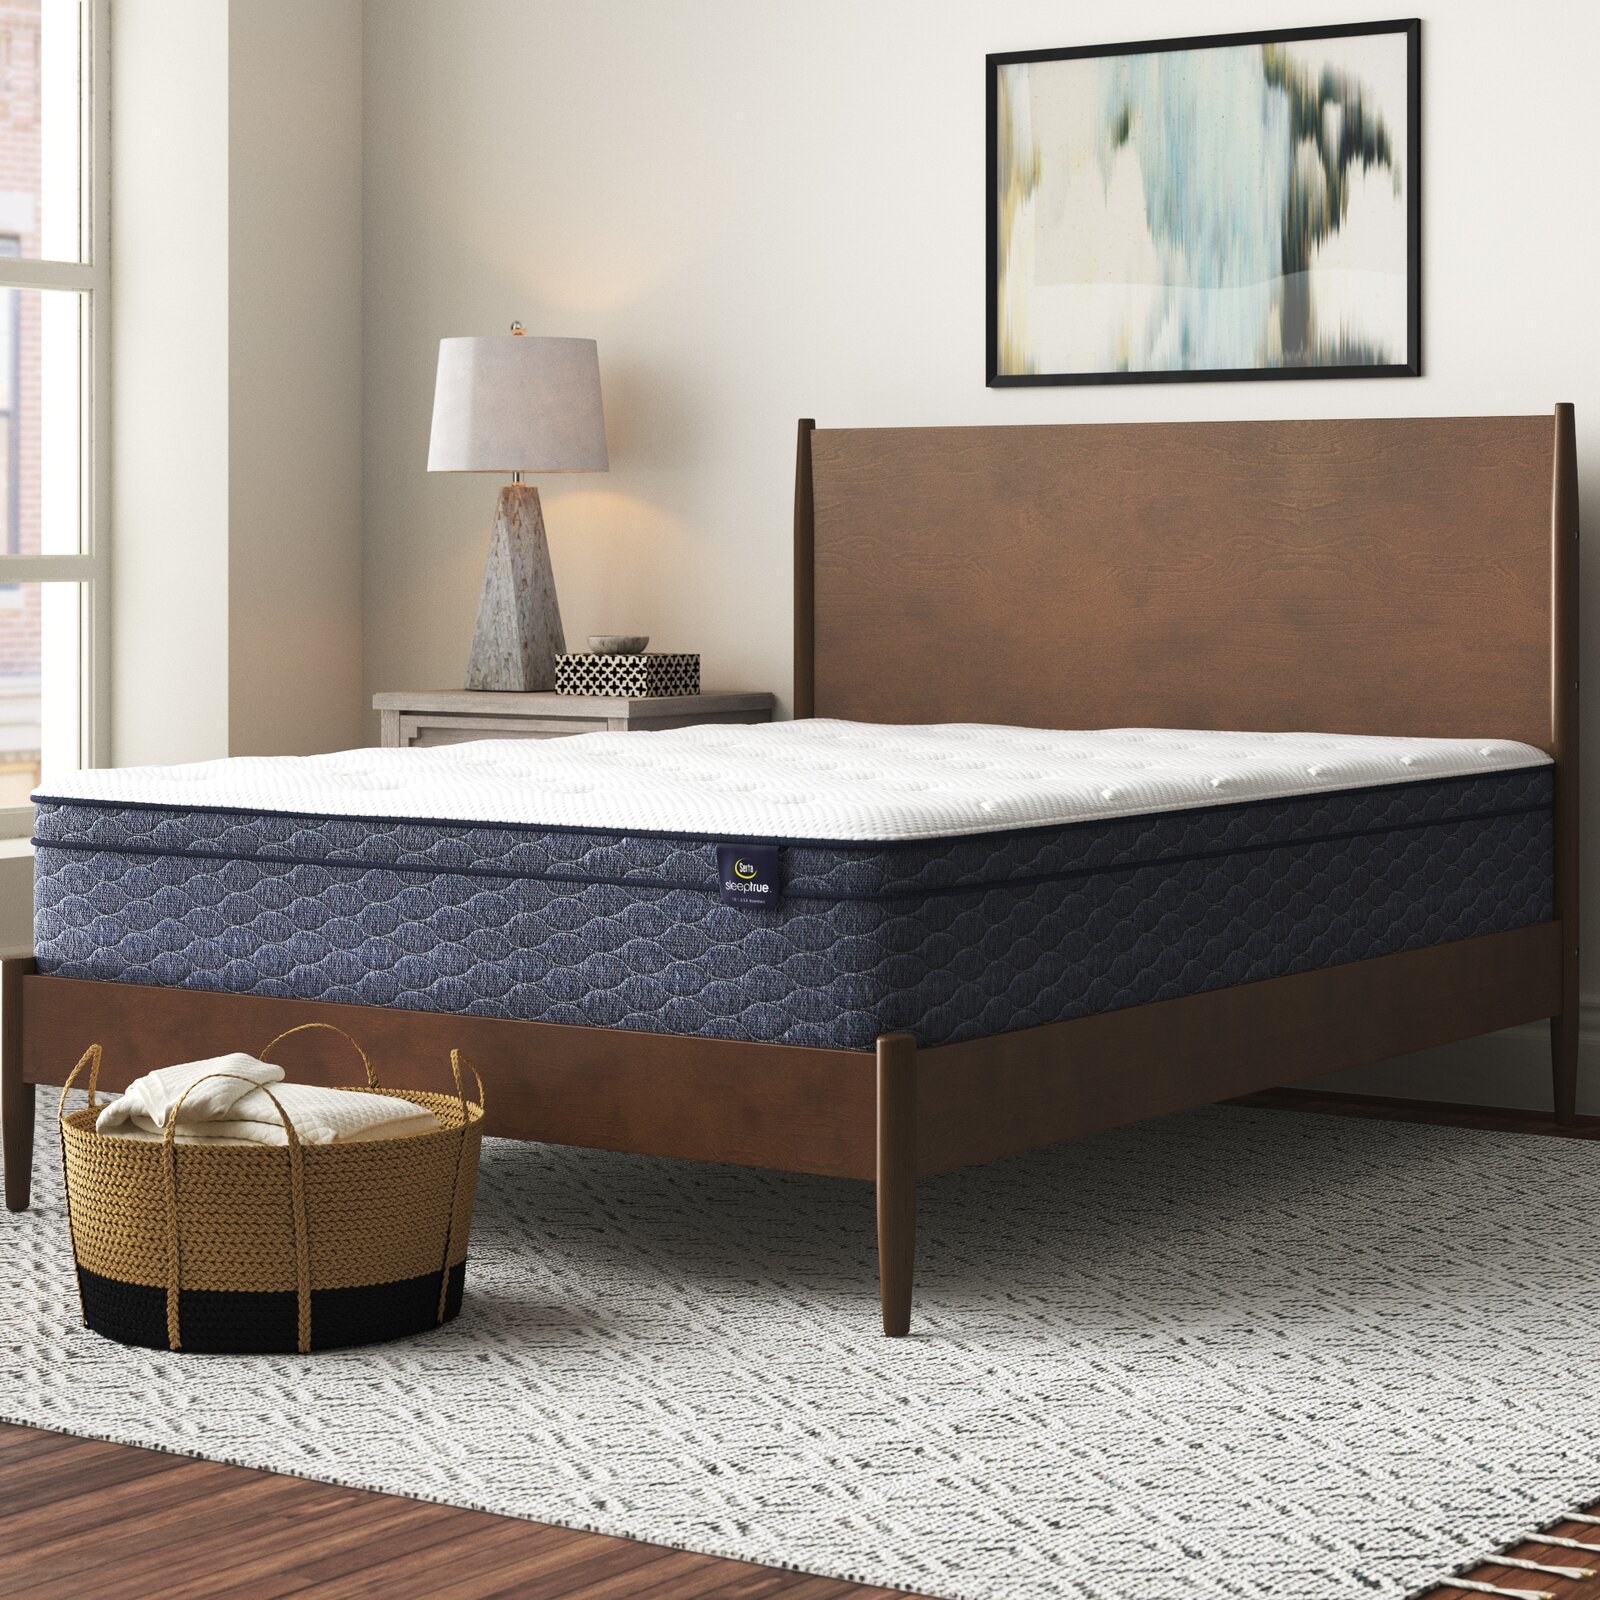 Image of the blue and white mattress